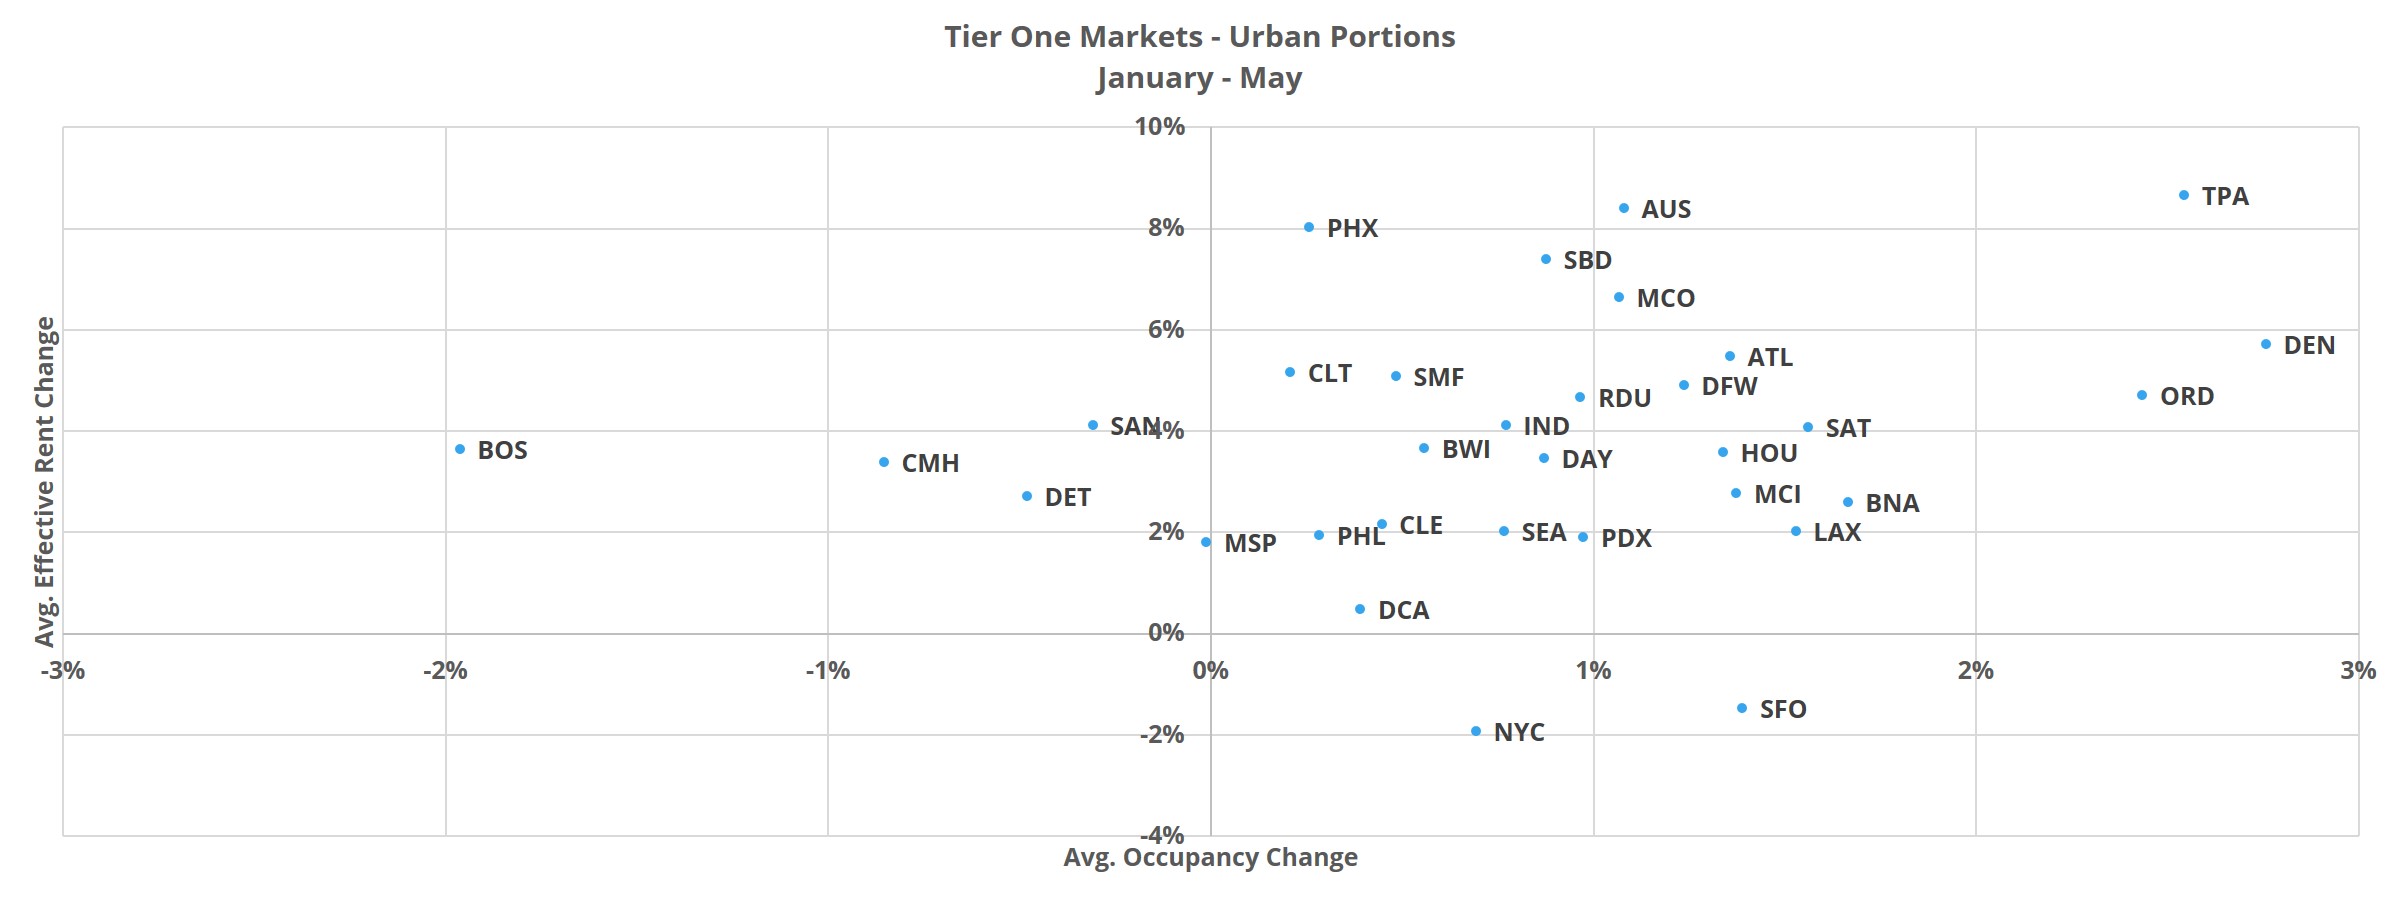 Tier One Markets - Urban Portions